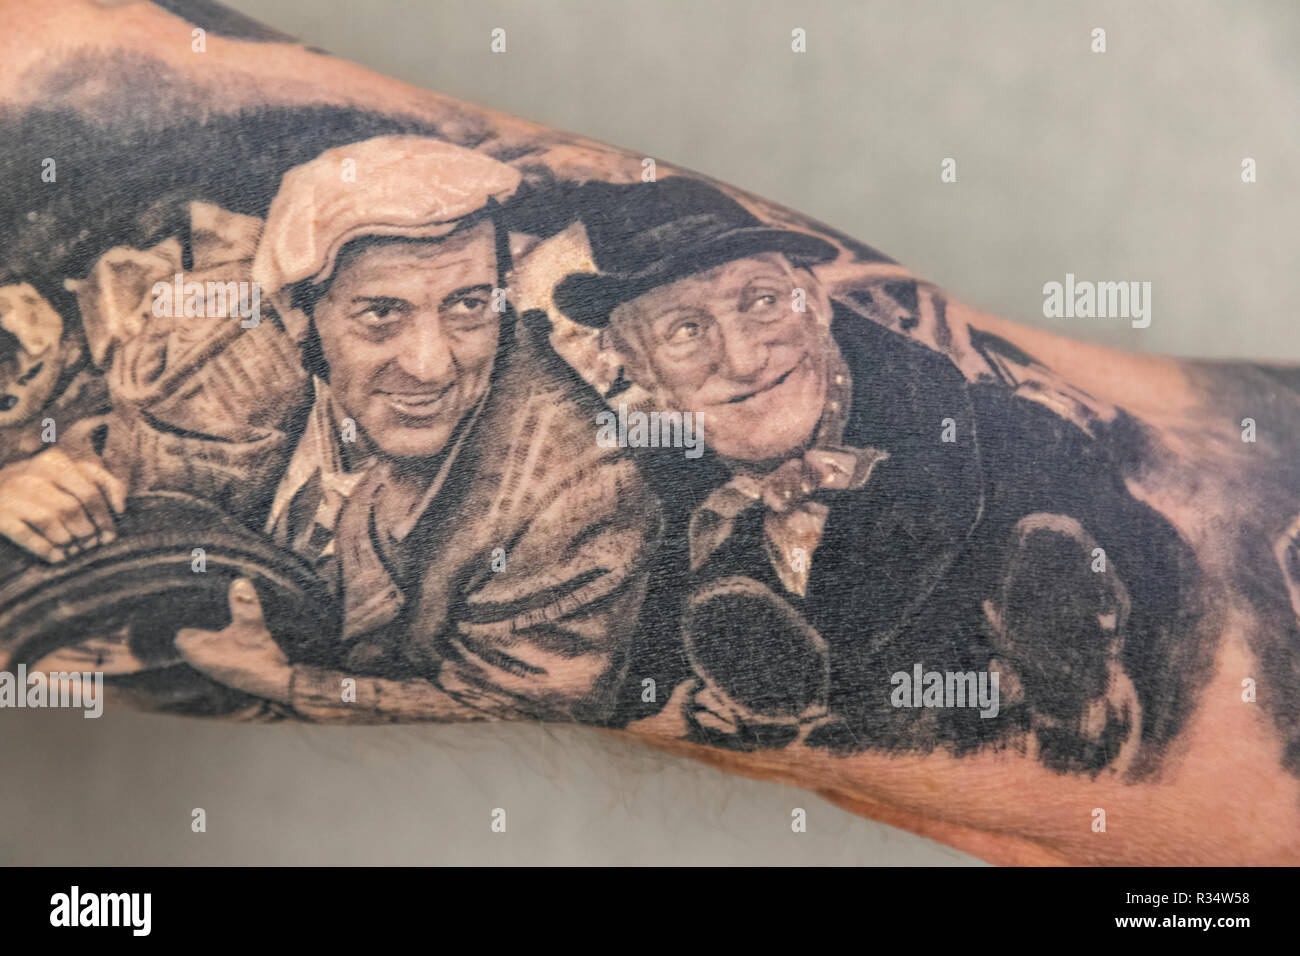 England, London, Wapping, Tobacco Dock, London Tattoo Convention, Tattooed Male showing Characters from The English TV show Steptoe and Son Stock Photo